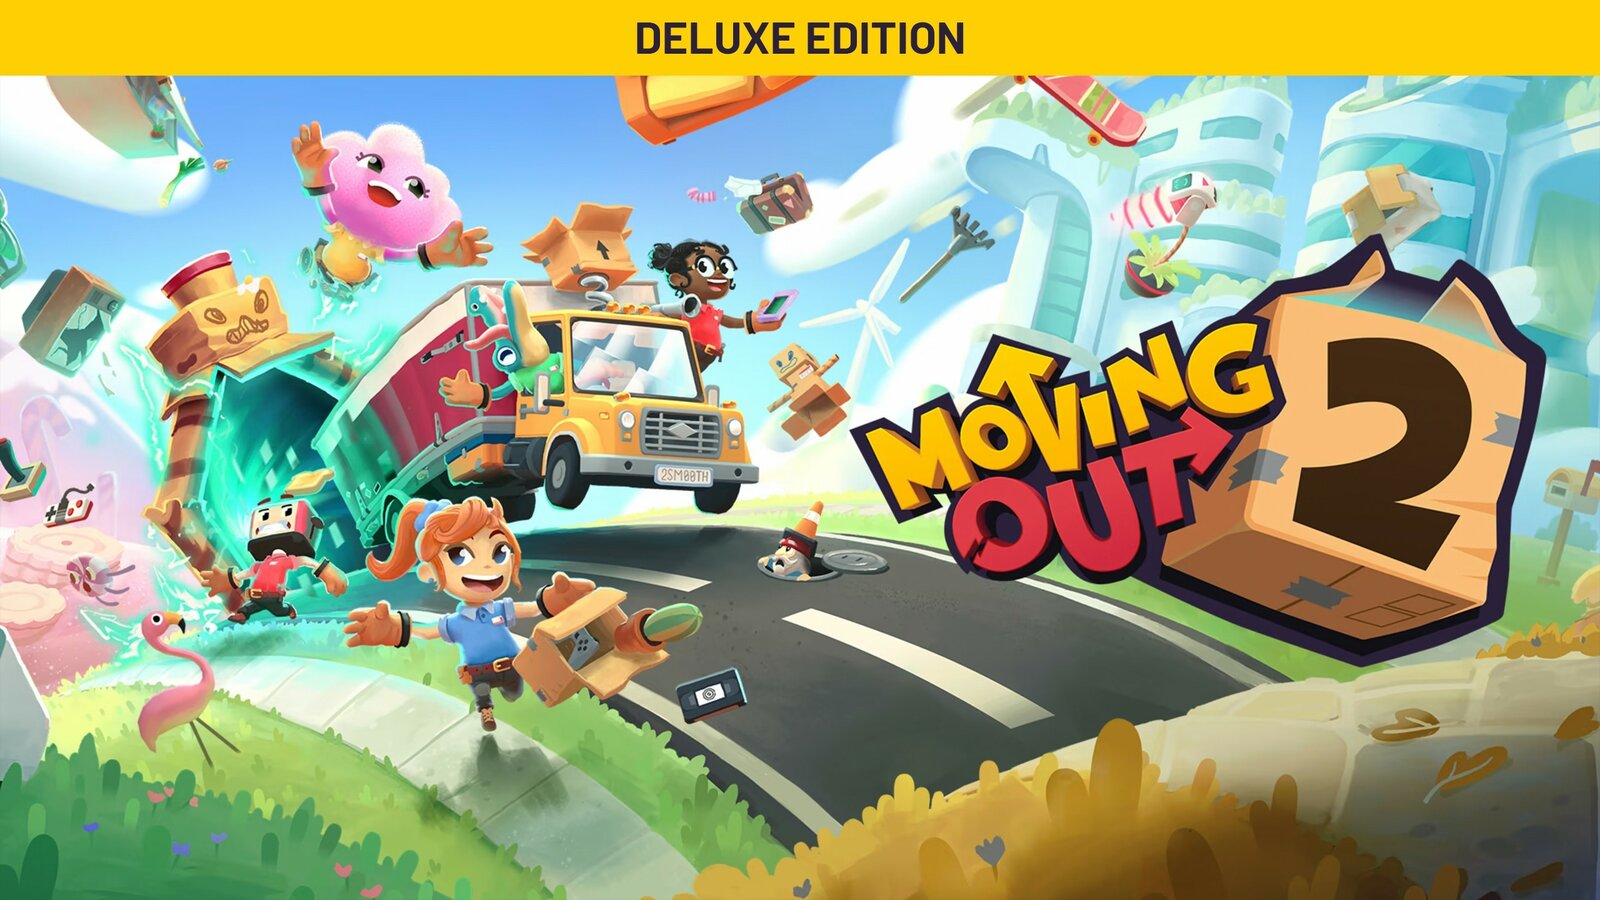 Moving Out 2 - Deluxe Edition